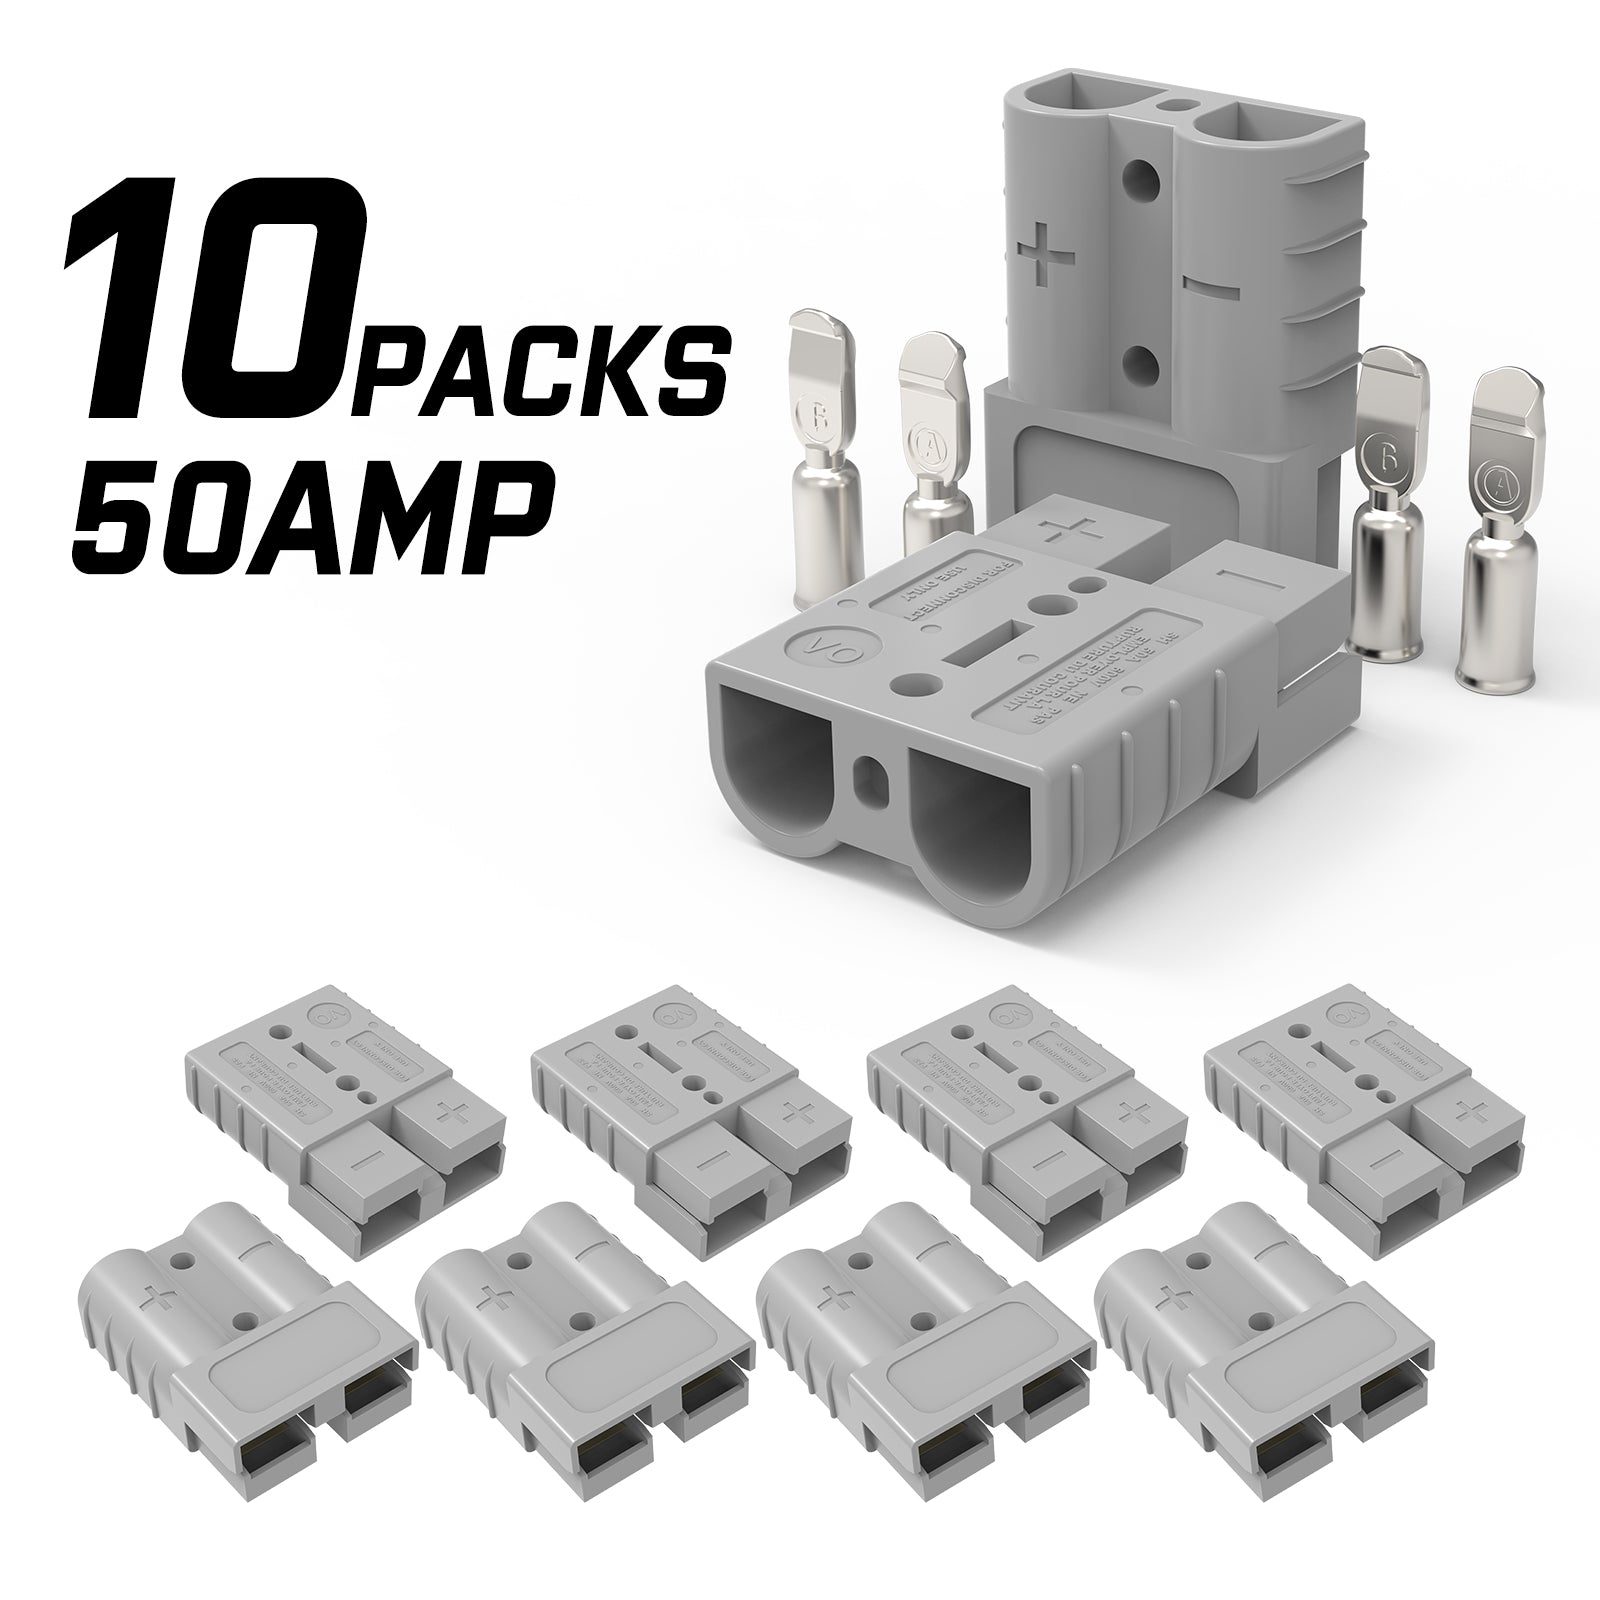 Impact-Resistant 50A Anderson Style Plug Set, 10x with Copper Connectors